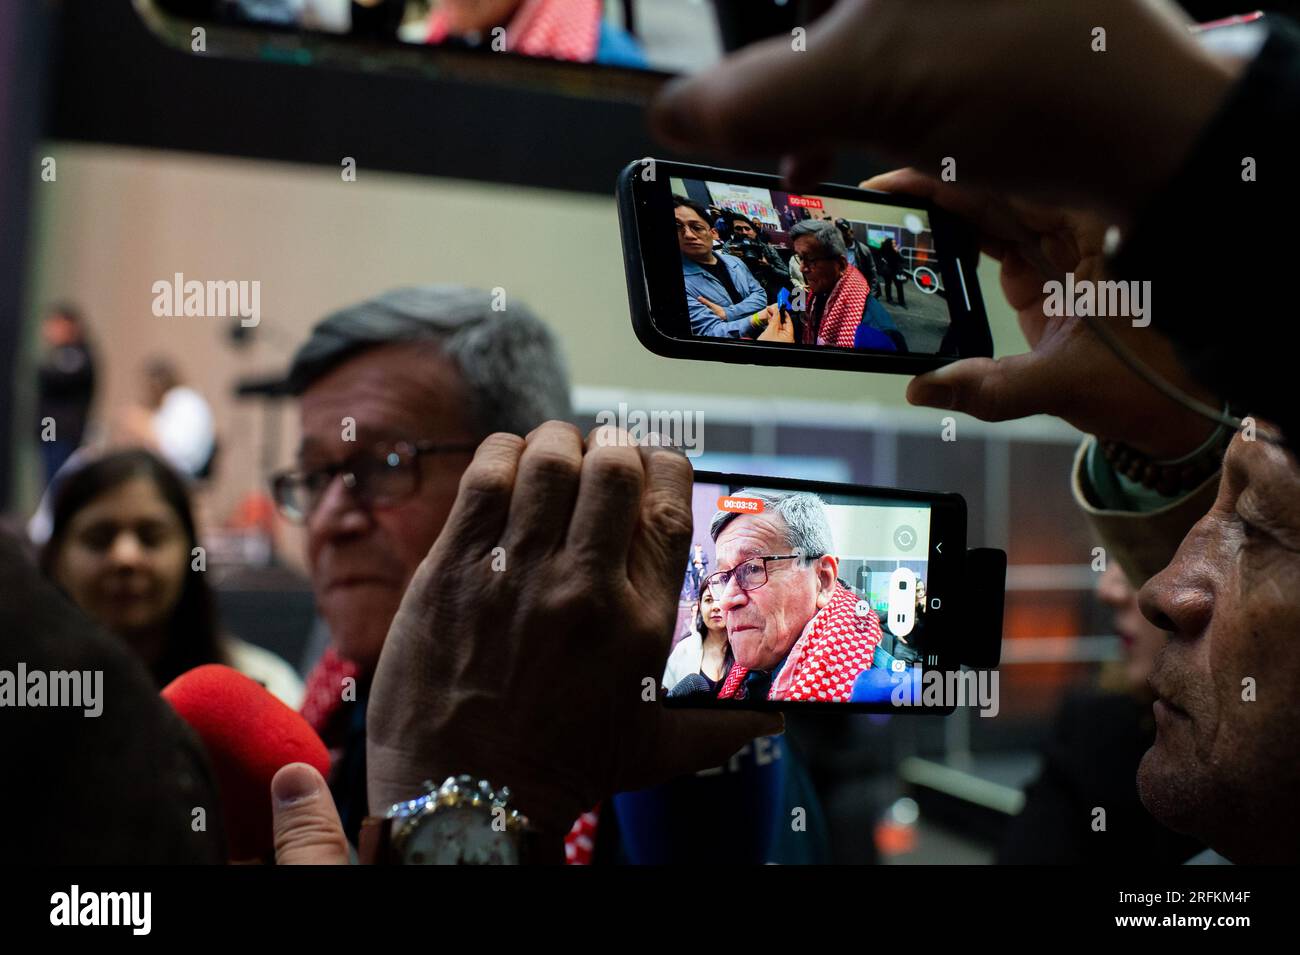 National Liberation Army leader Israel Ramirez, alias 'Pablo Beltran' speaks to the media during a ceremony to begin a six-month cease-fire as part of Stock Photo